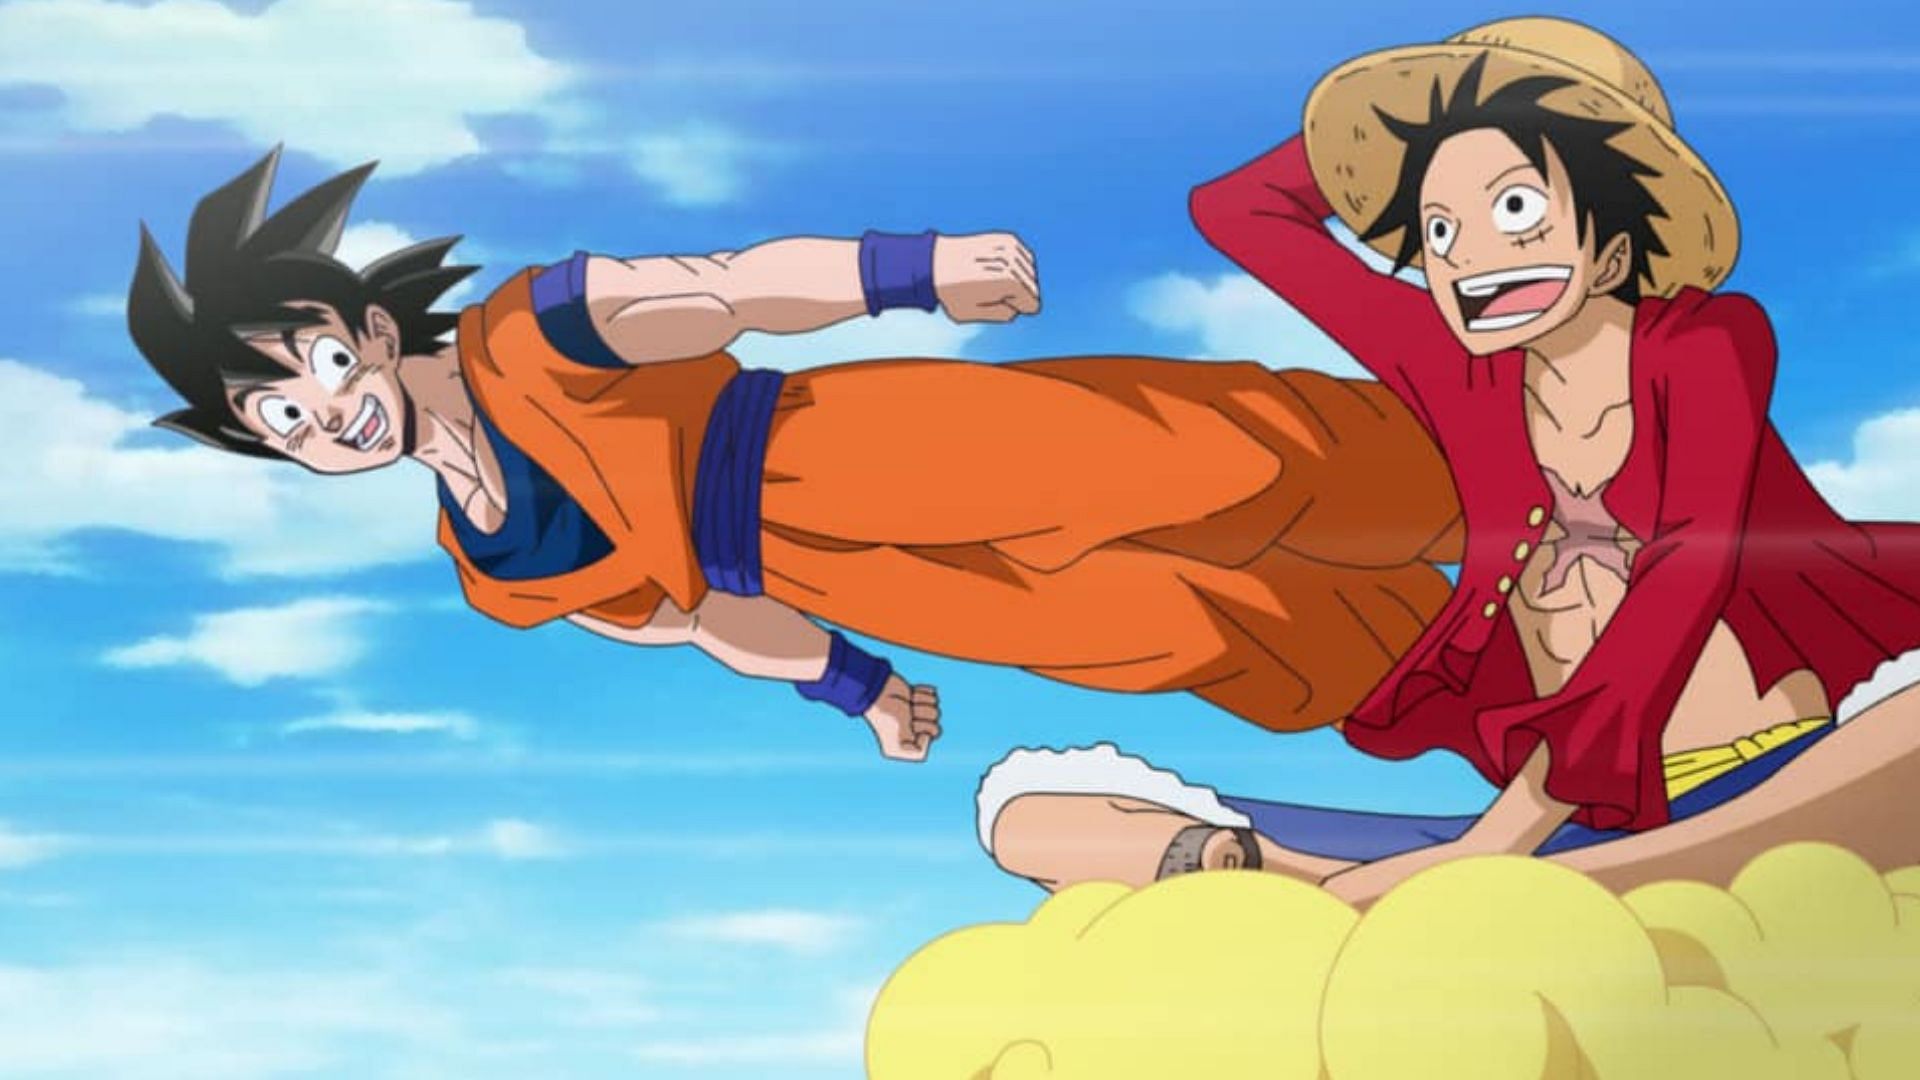 Luffy and Goku appear together in a crossover episode (Image via Toei Animation)